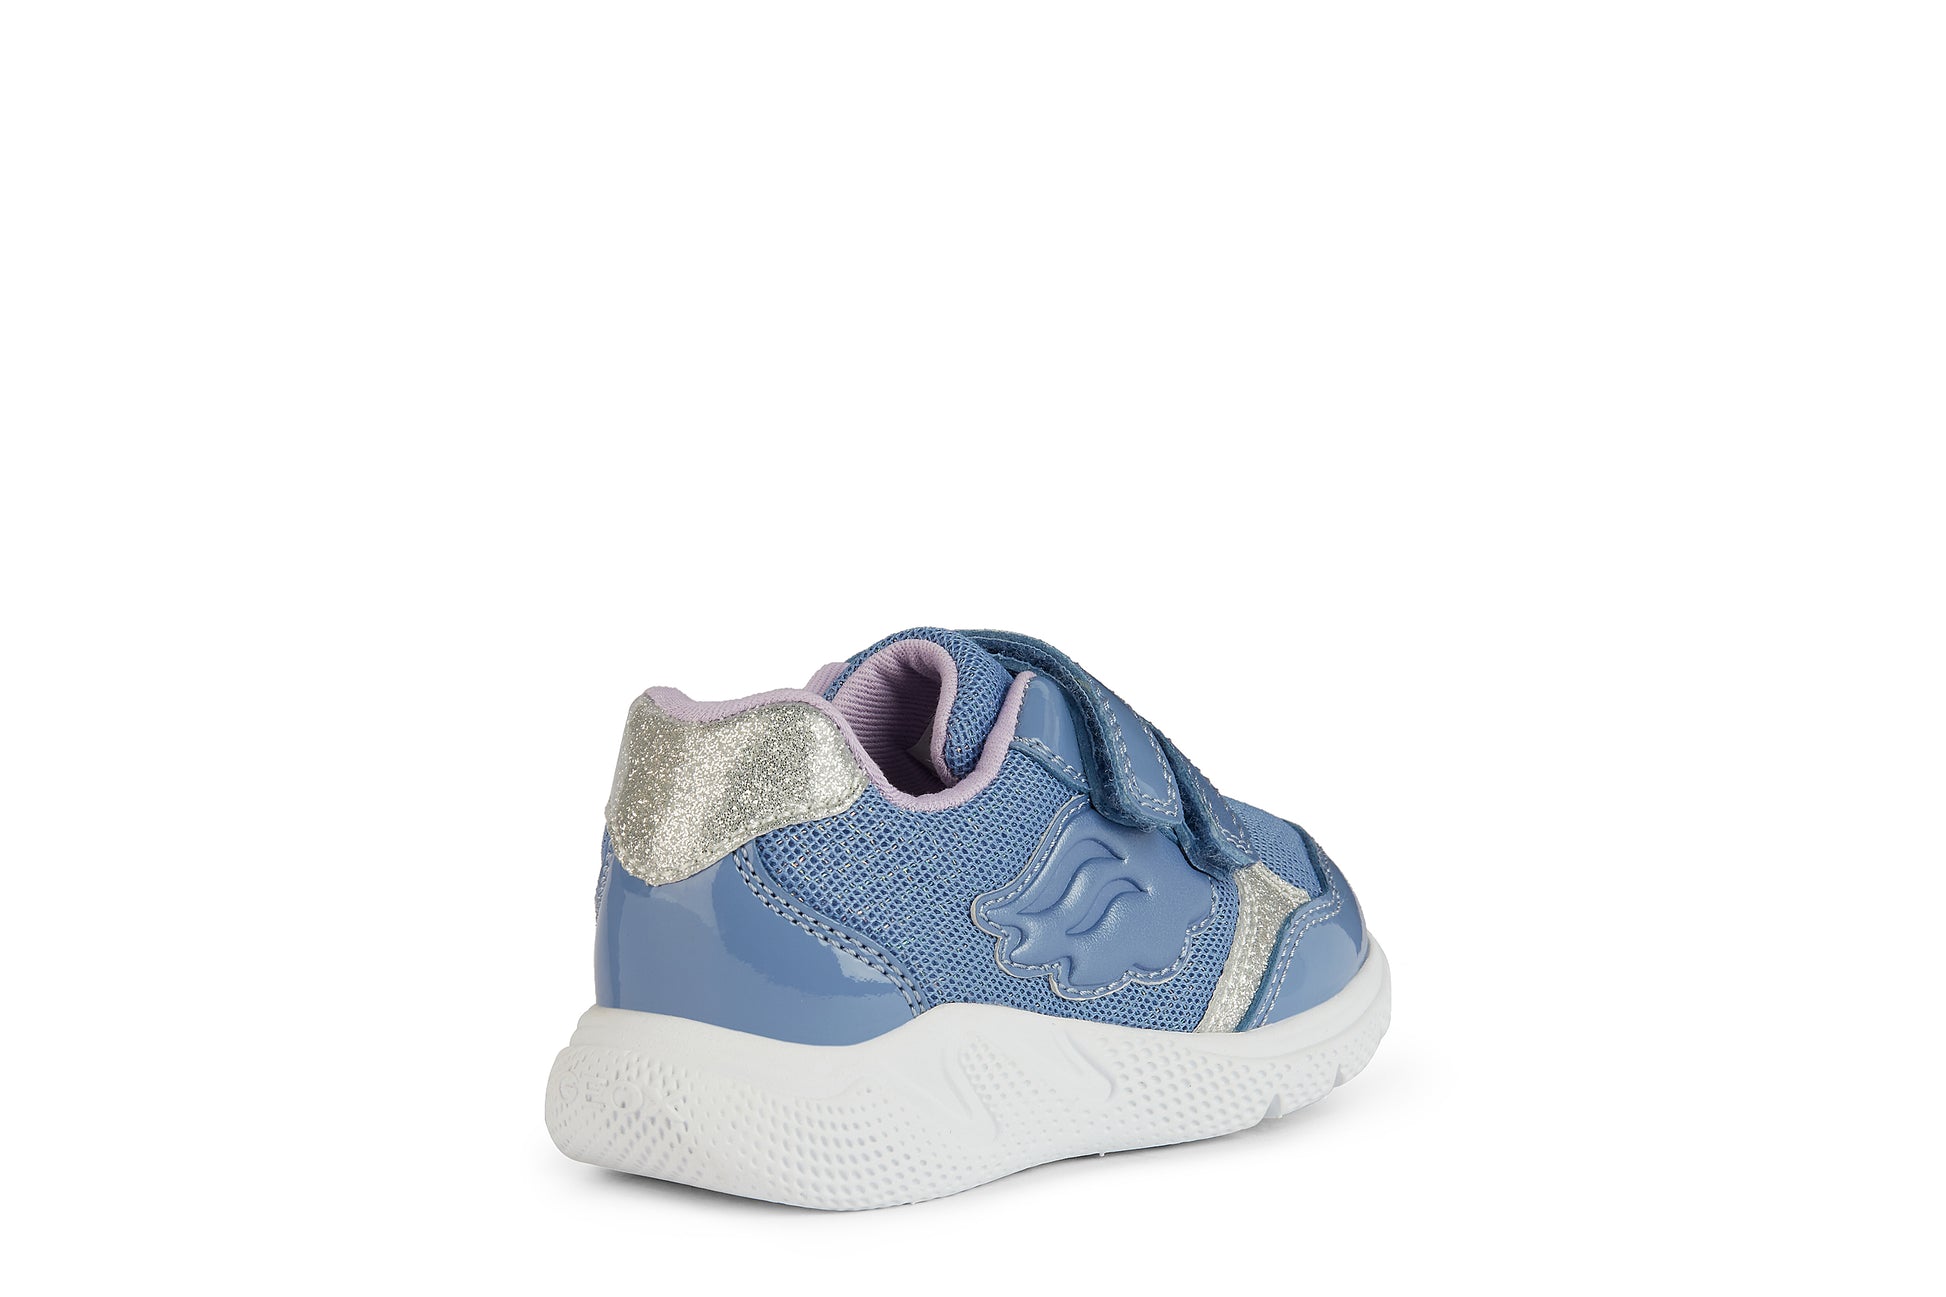 A girls trainer by Geox, style B Sprintye, in blue with silver glitter trim, wing detail and double velcro fastening. Angled view of right side.